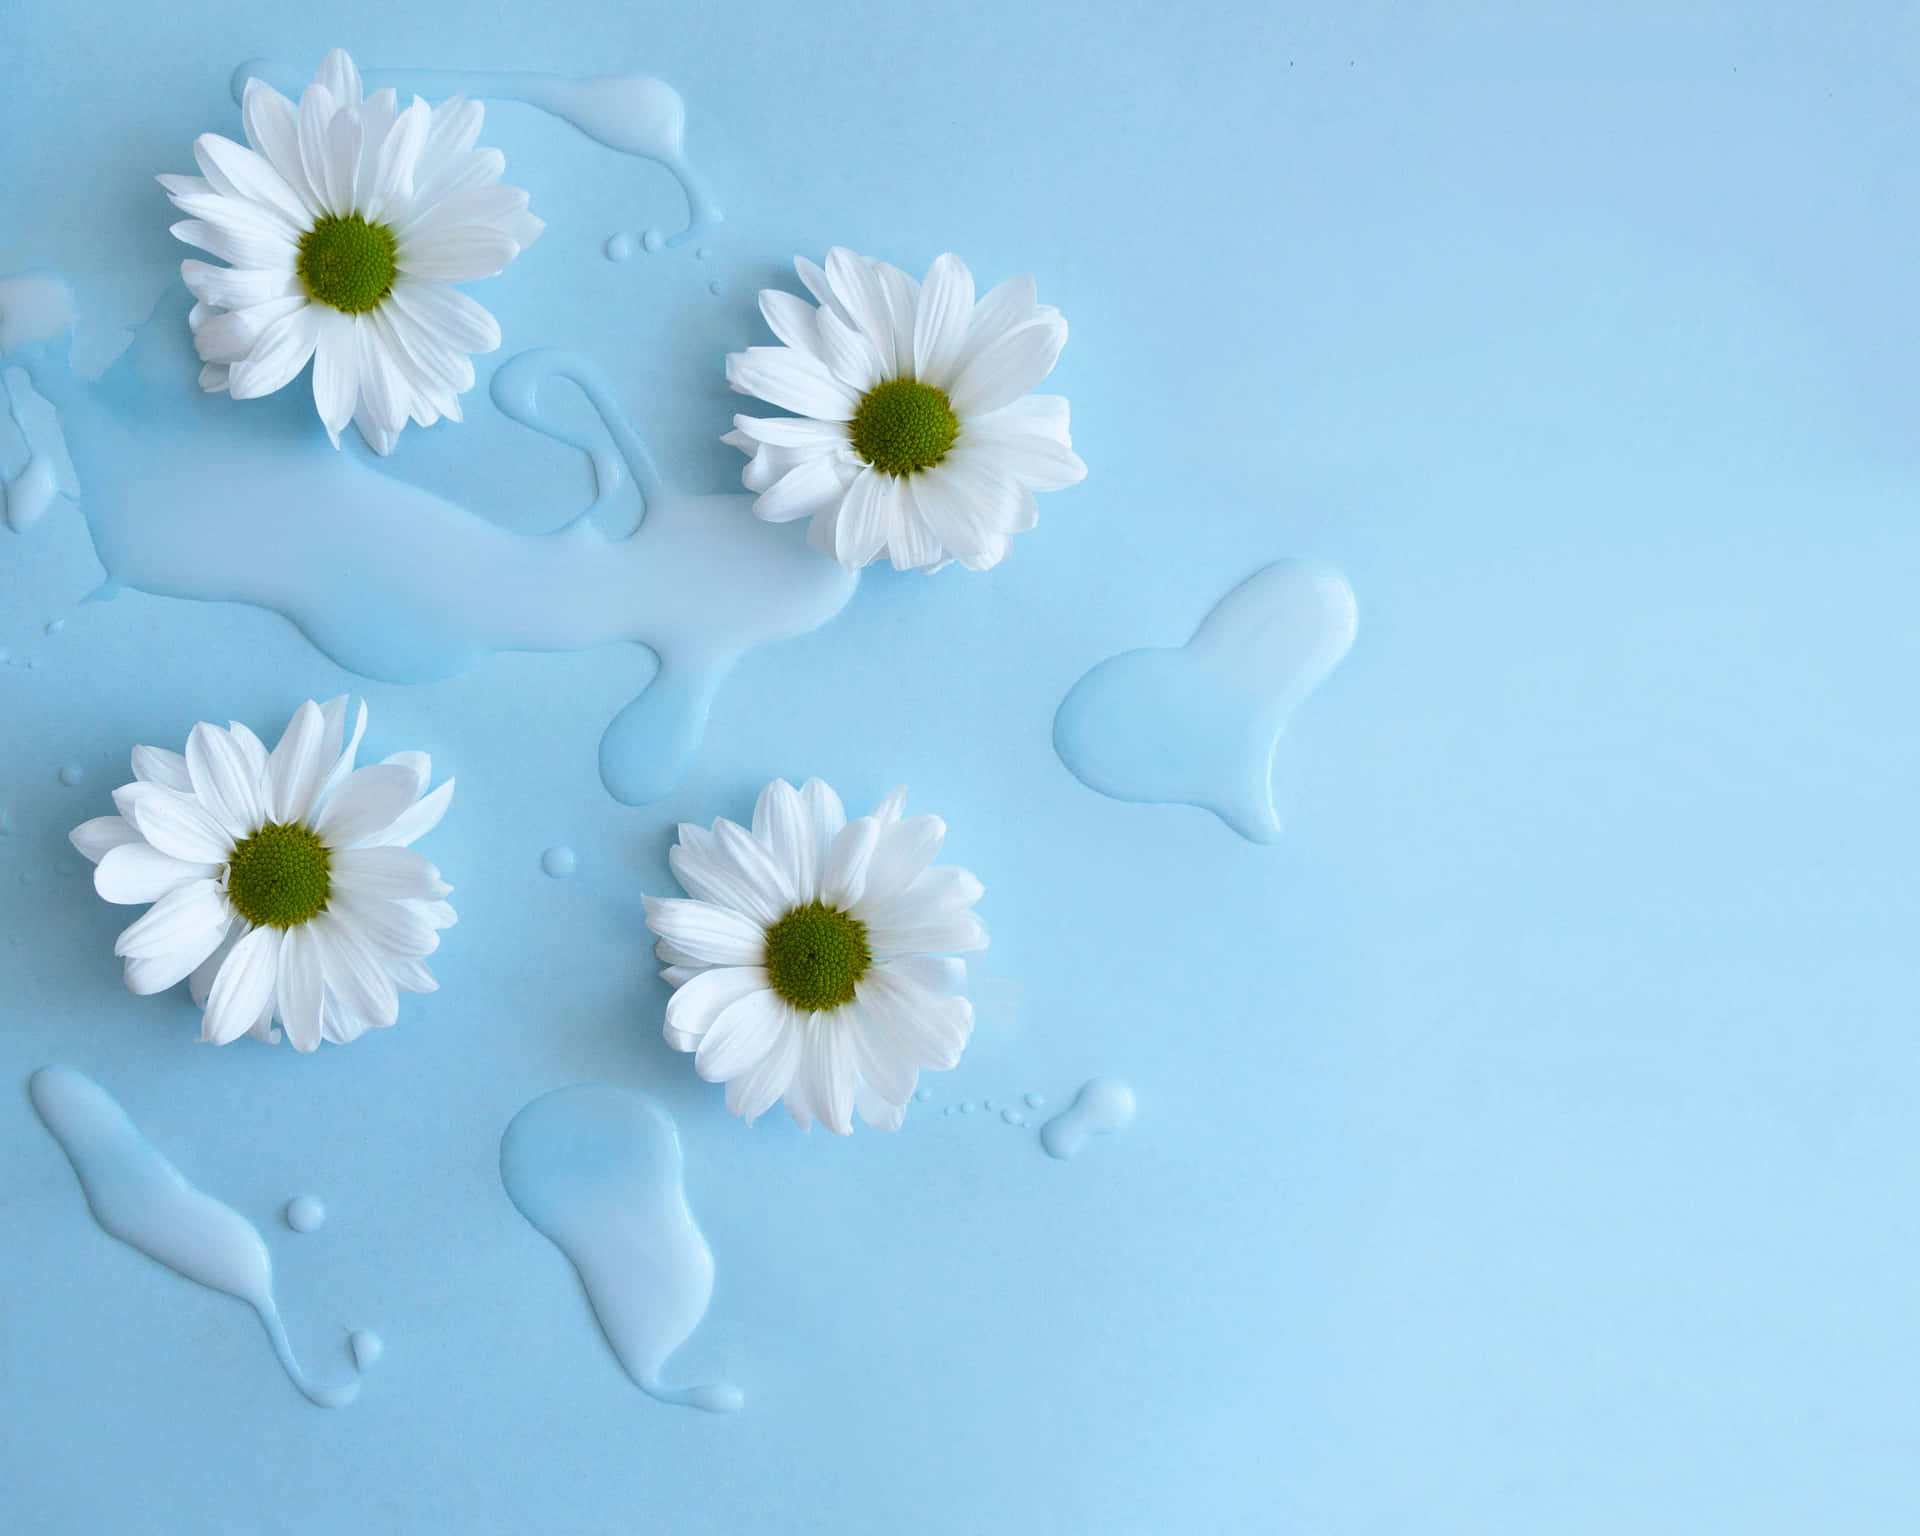 White Daisies On A Blue Background With Water Drops Wallpaper